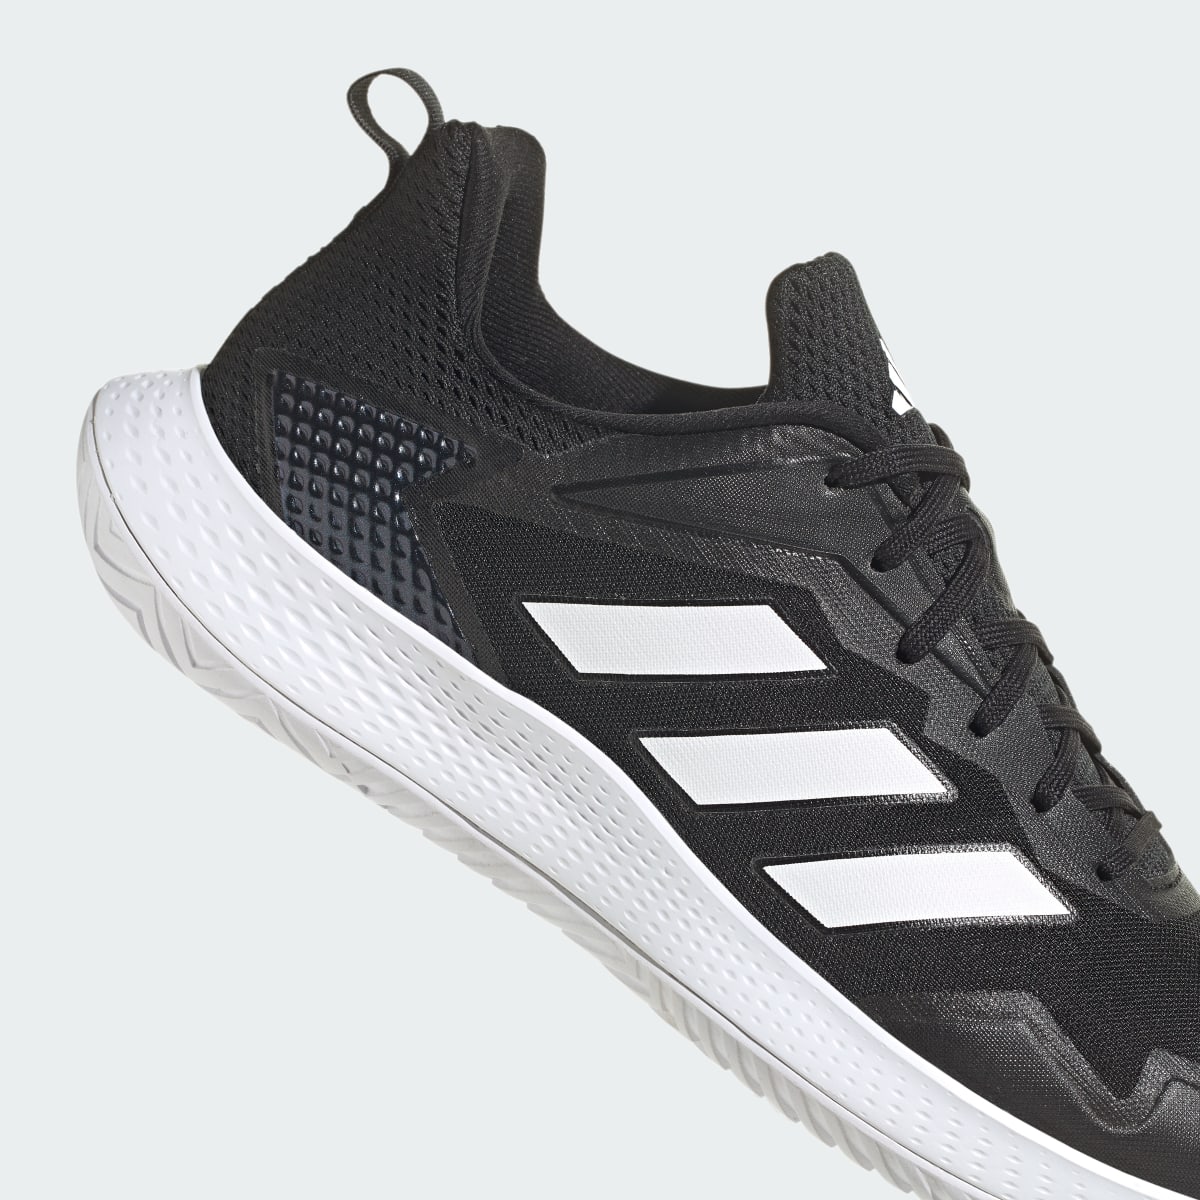 Adidas Defiant Speed Tennis Shoes. 9